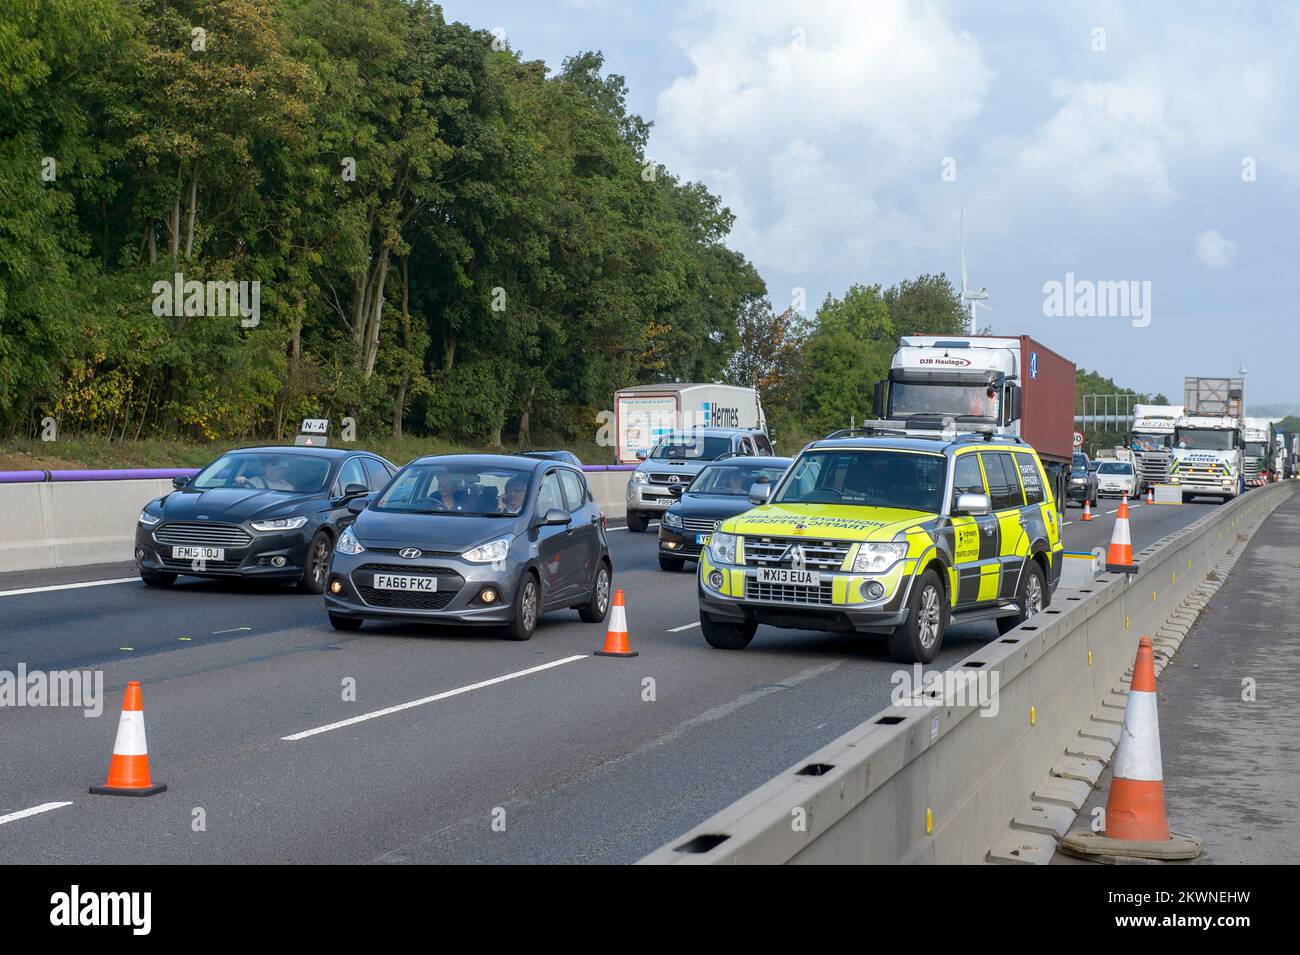 Highways England traffic officer attending an incident in roadworks on the M1 motorway, England. Stock Photo